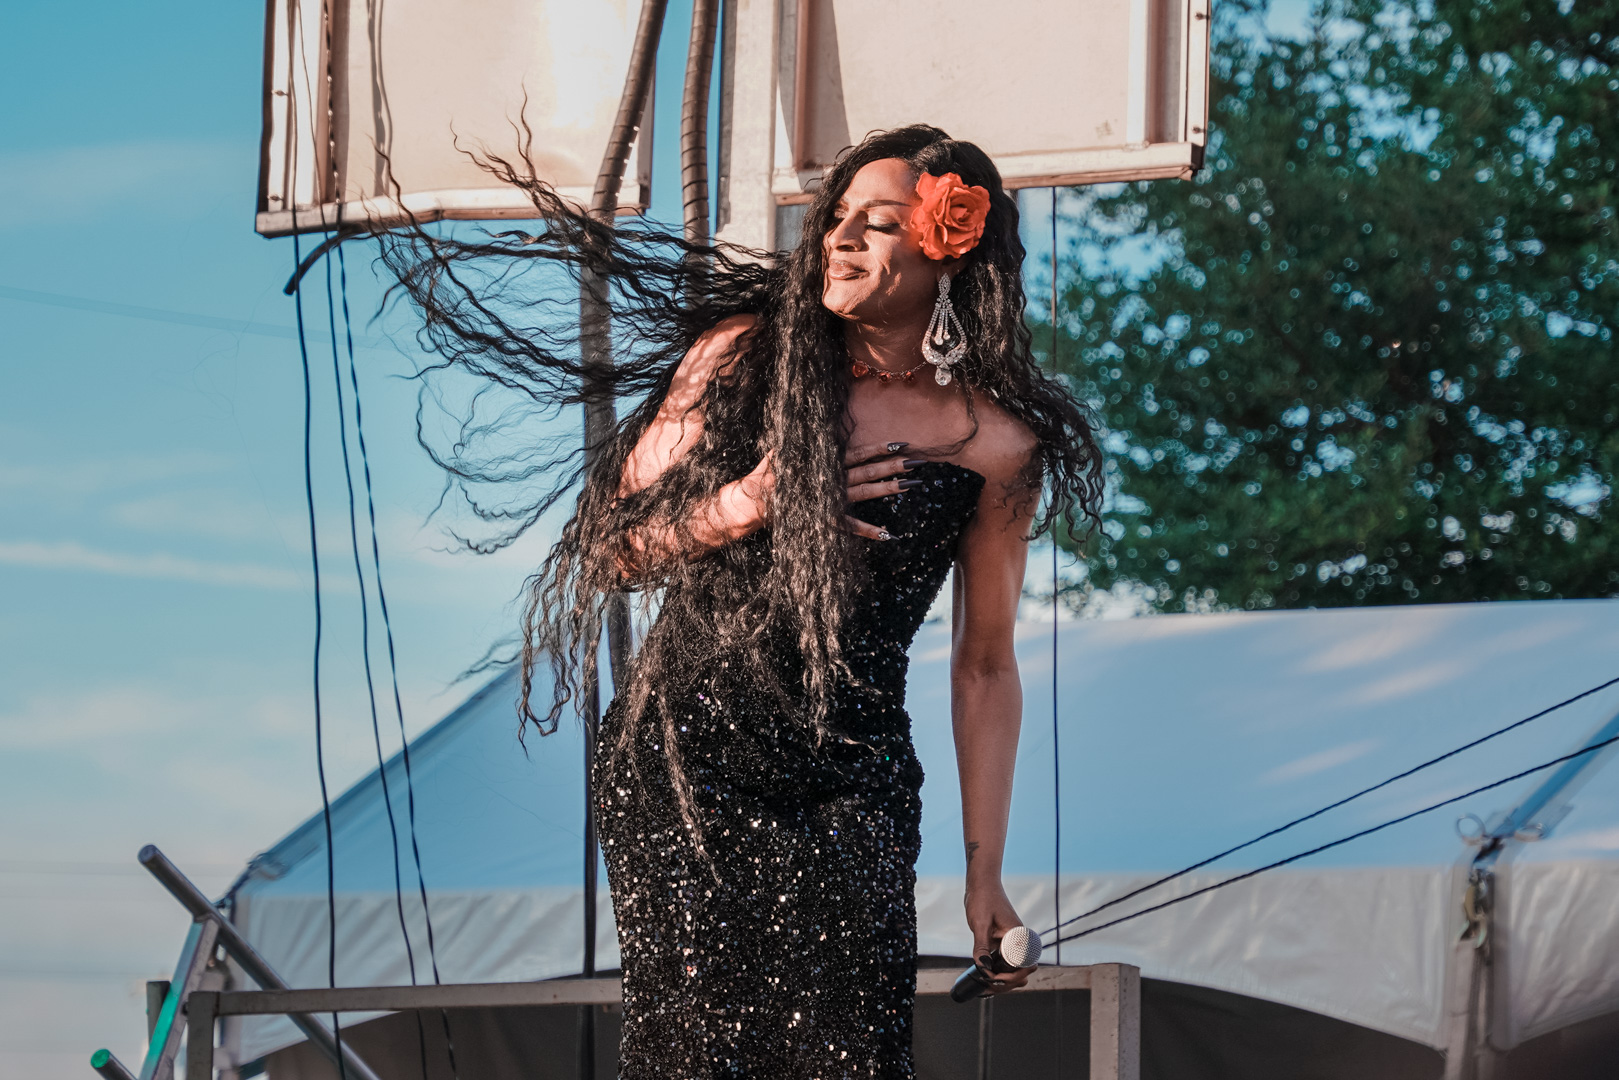 A performer on stage smiling with long hair blowing in the wind